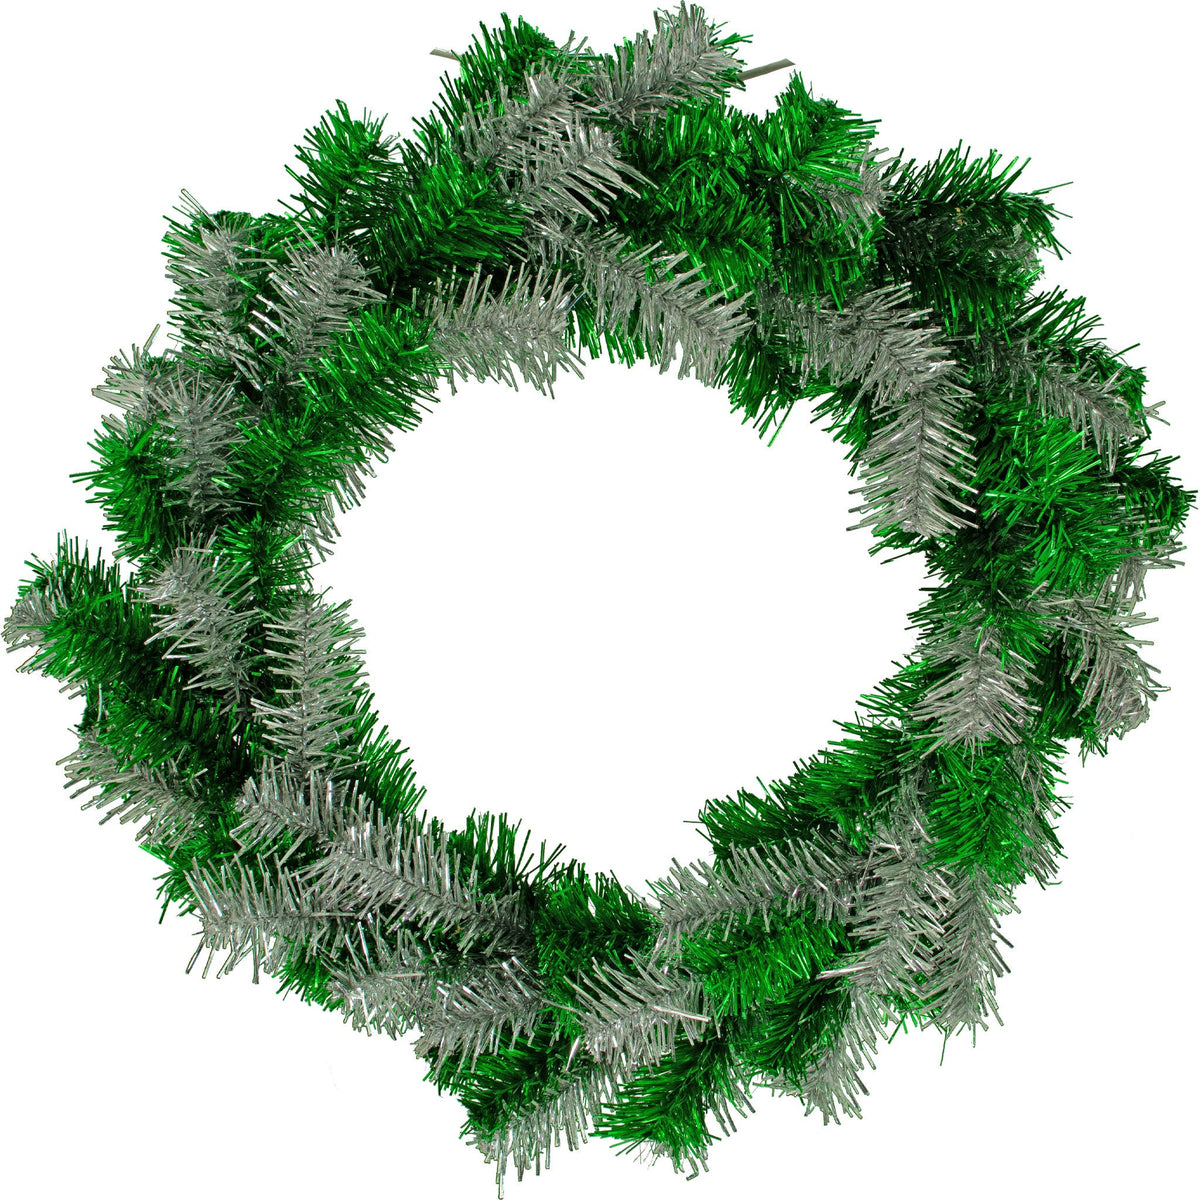 Green and Silver Tinsel Christmas Wreaths